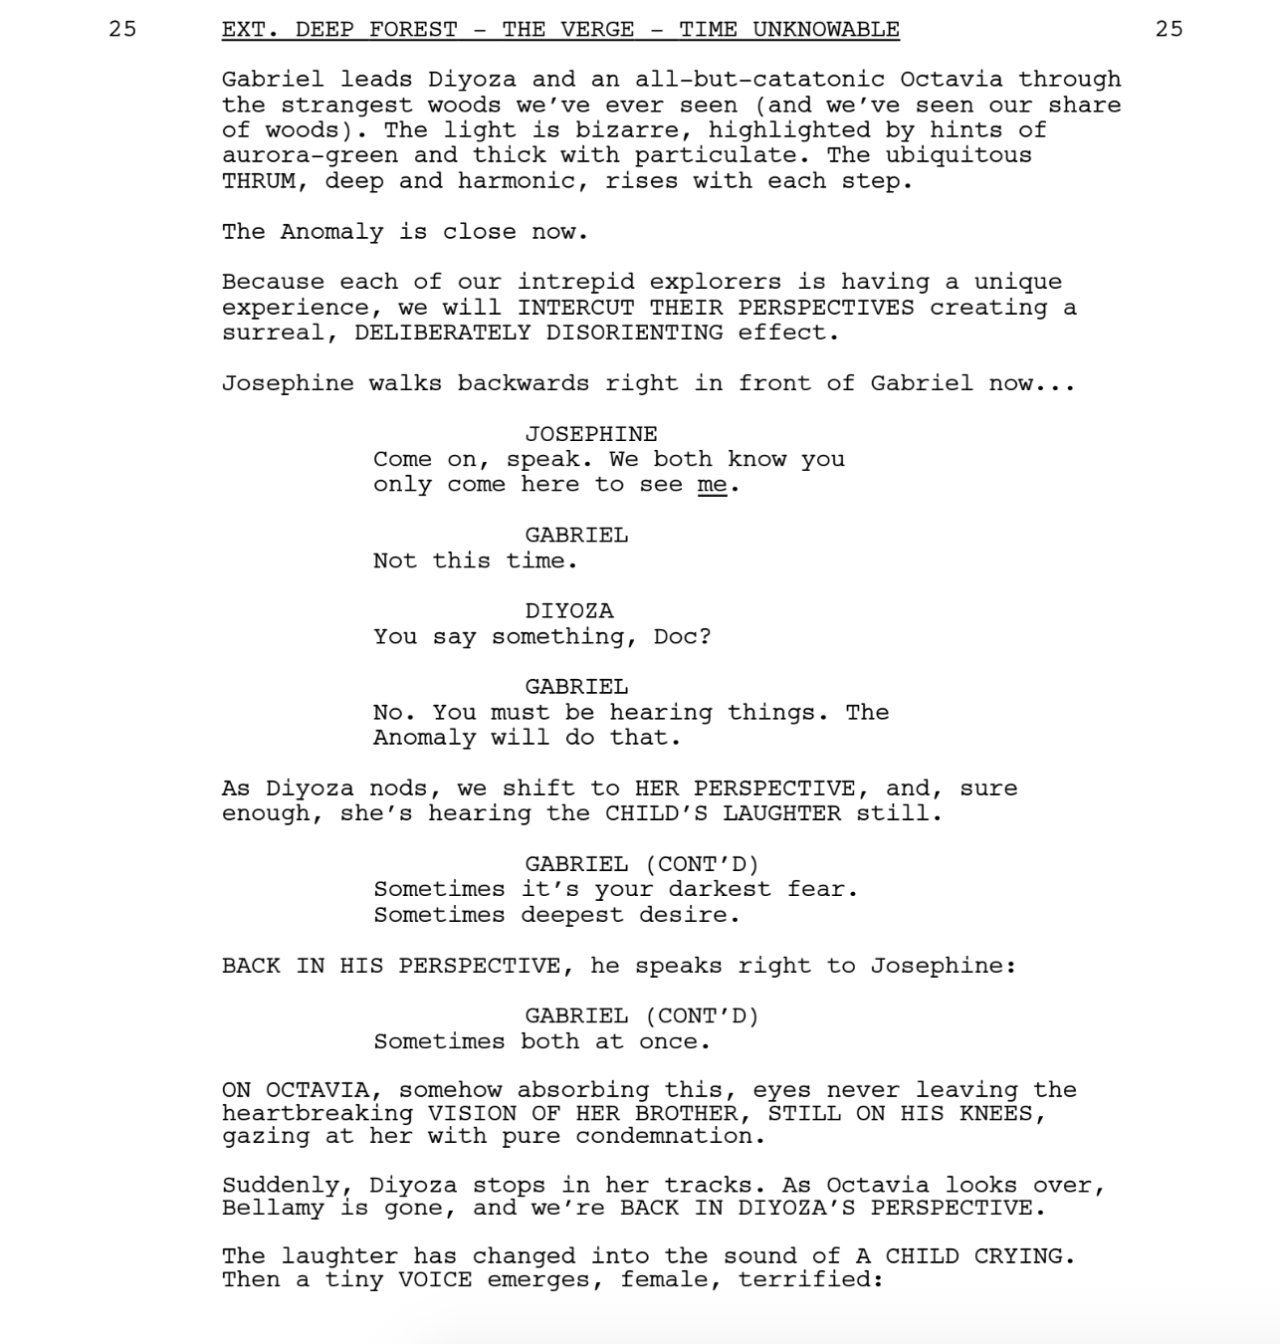 Welcome to this week’s first Script to Screen! Episode 608 was written by The brilliant